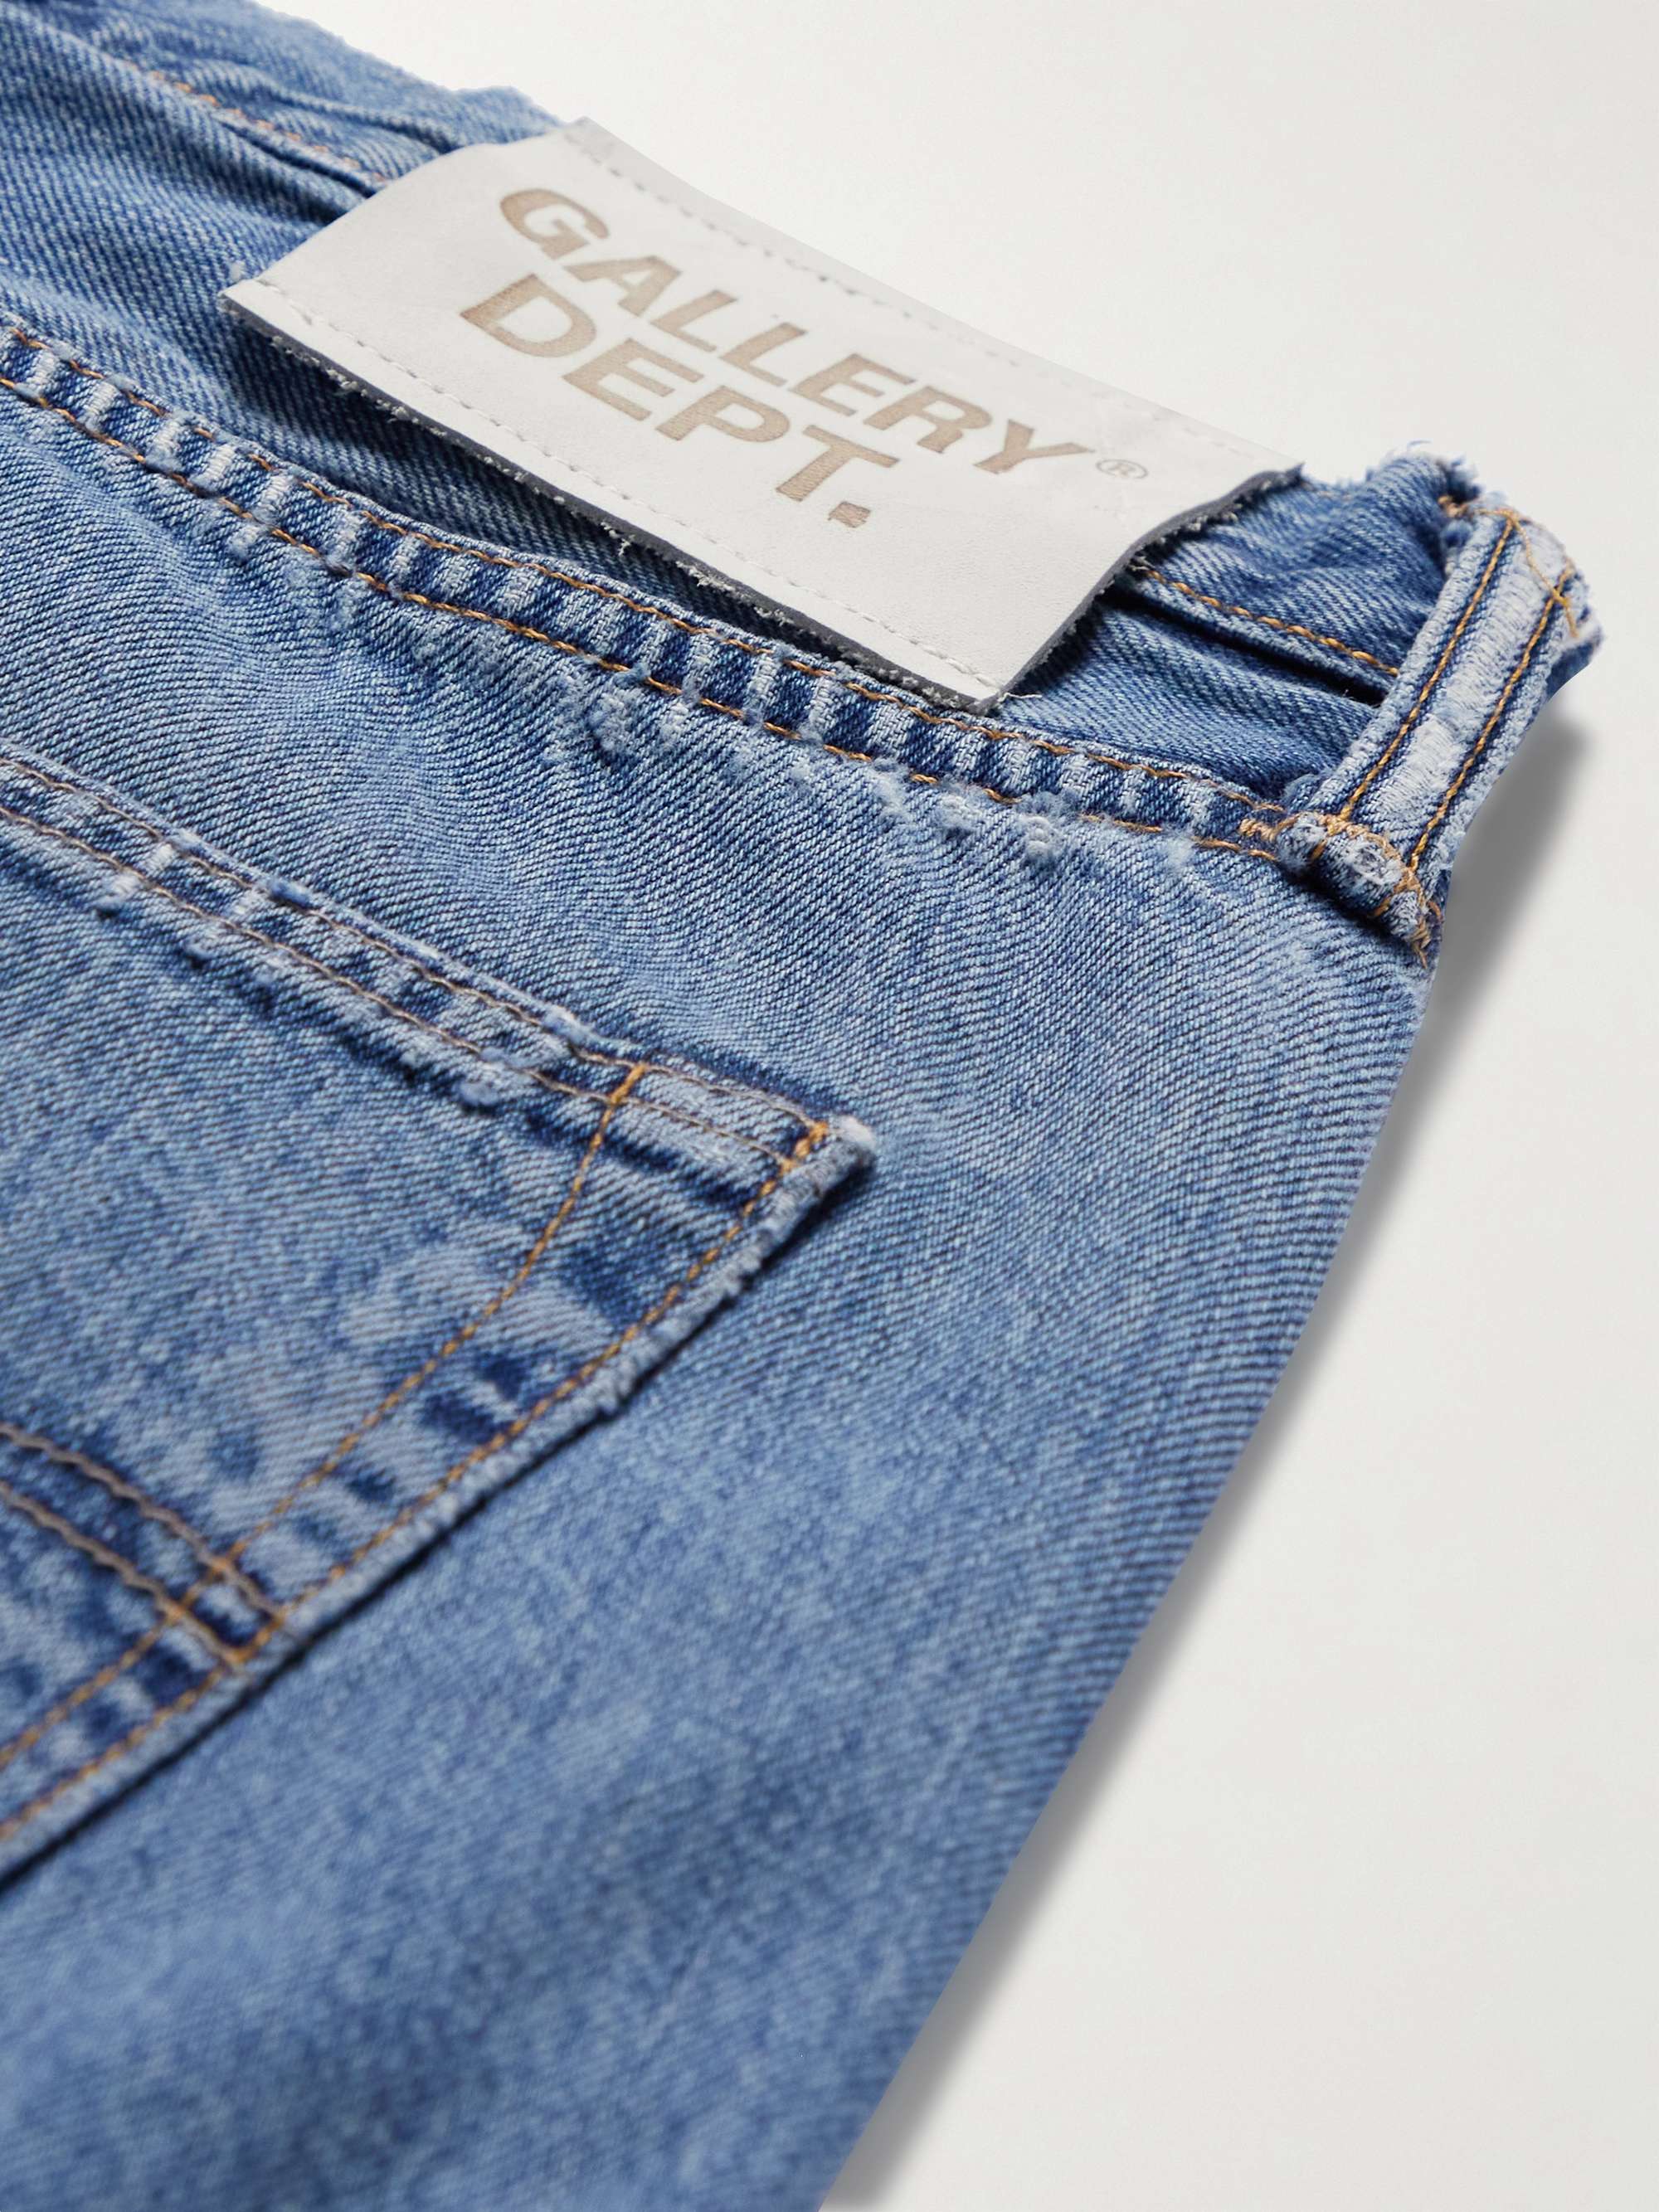 GALLERY DEPT. 5001 Distressed Jeans